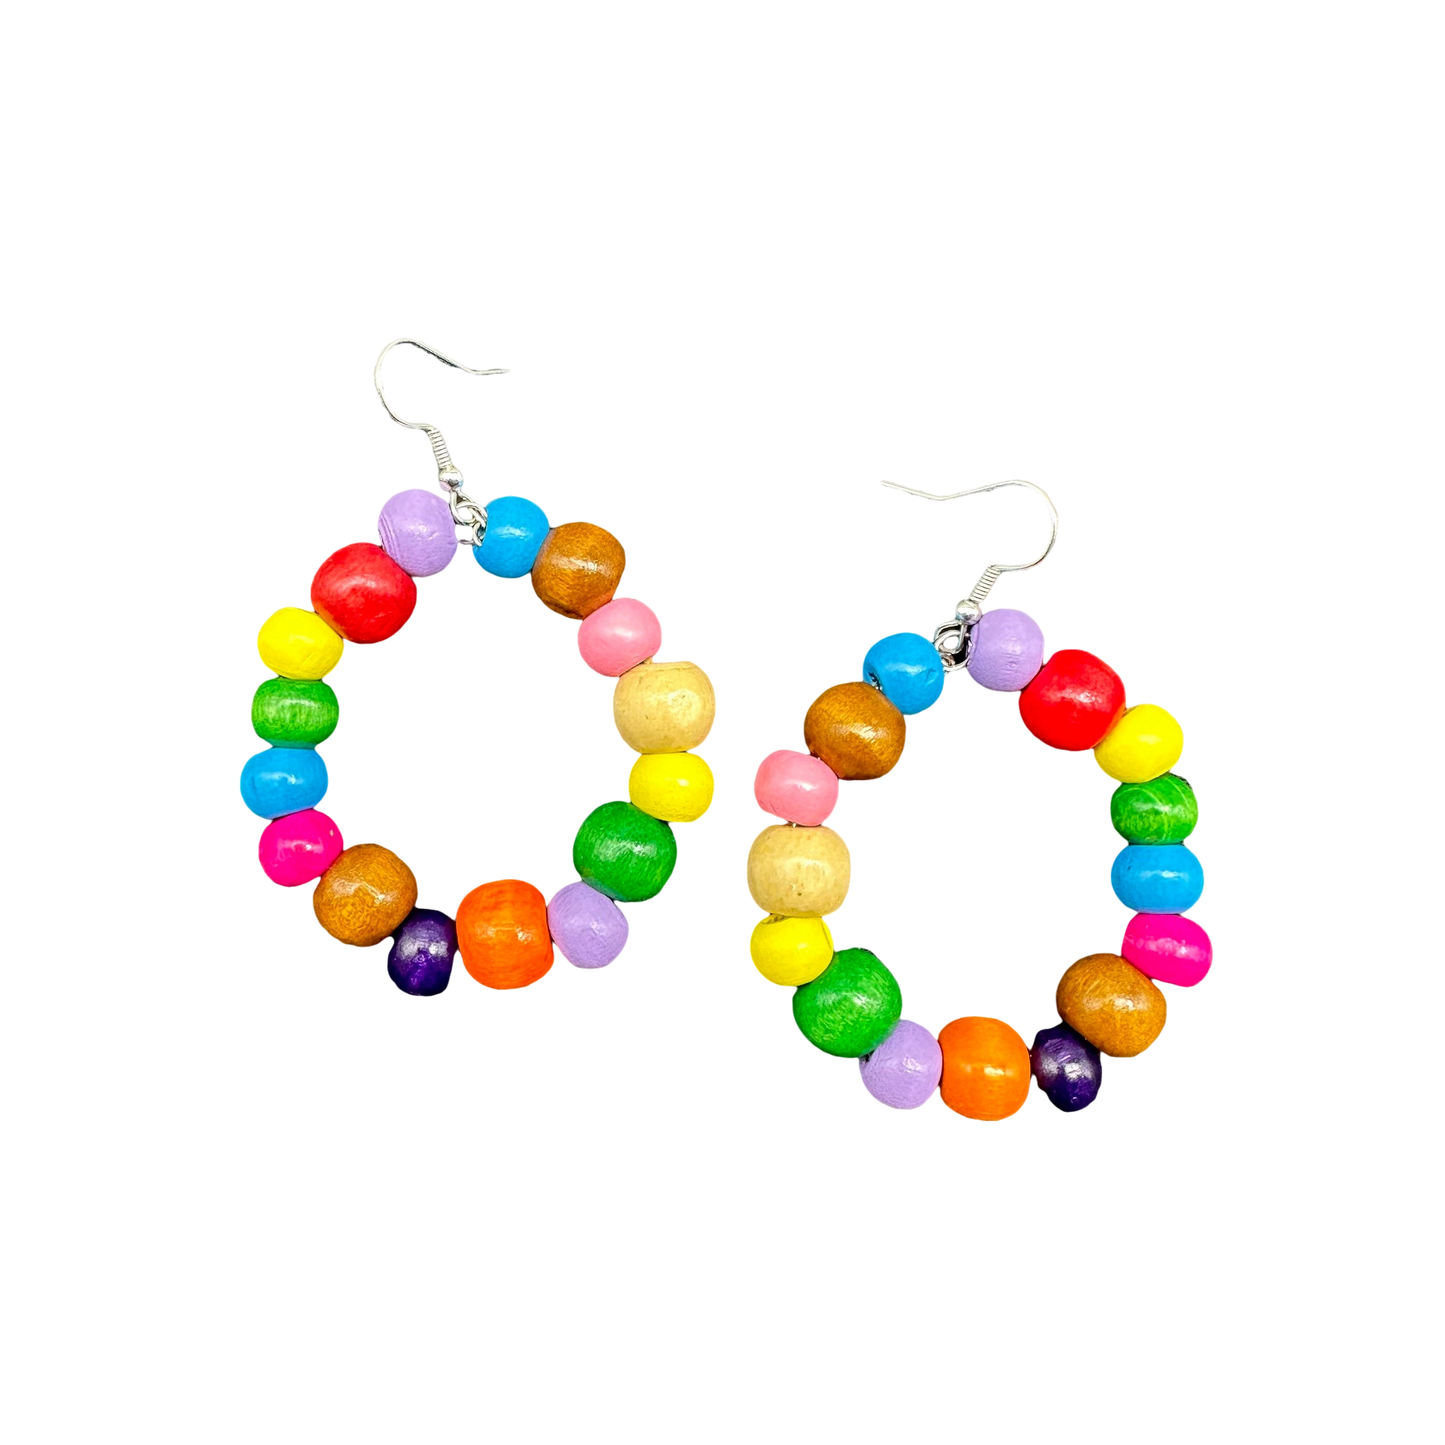 Multicolored Wood Bead Earrings for Pollera Congo and African Attires - Vivian Fong Designs